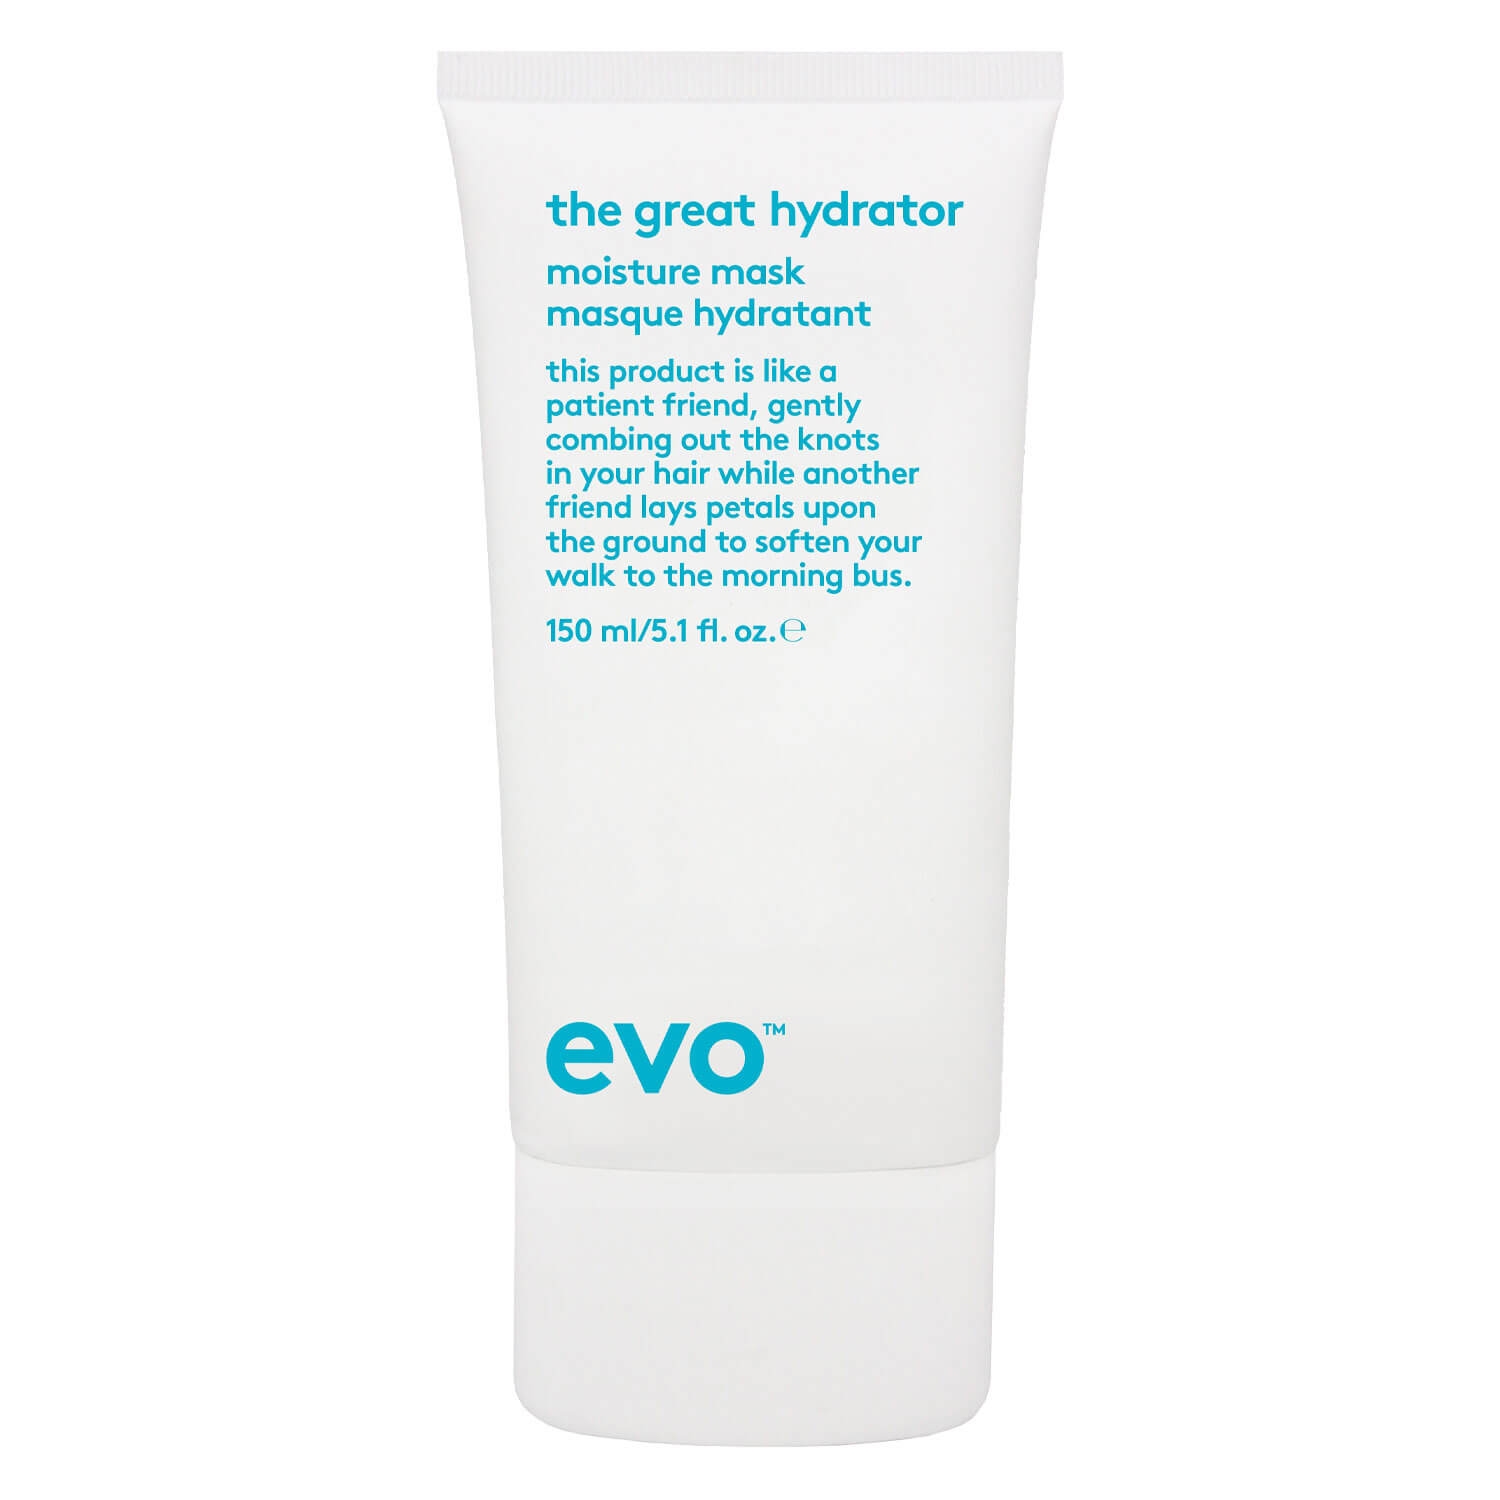 Product image from evo calm - the great hydrator moisture mask